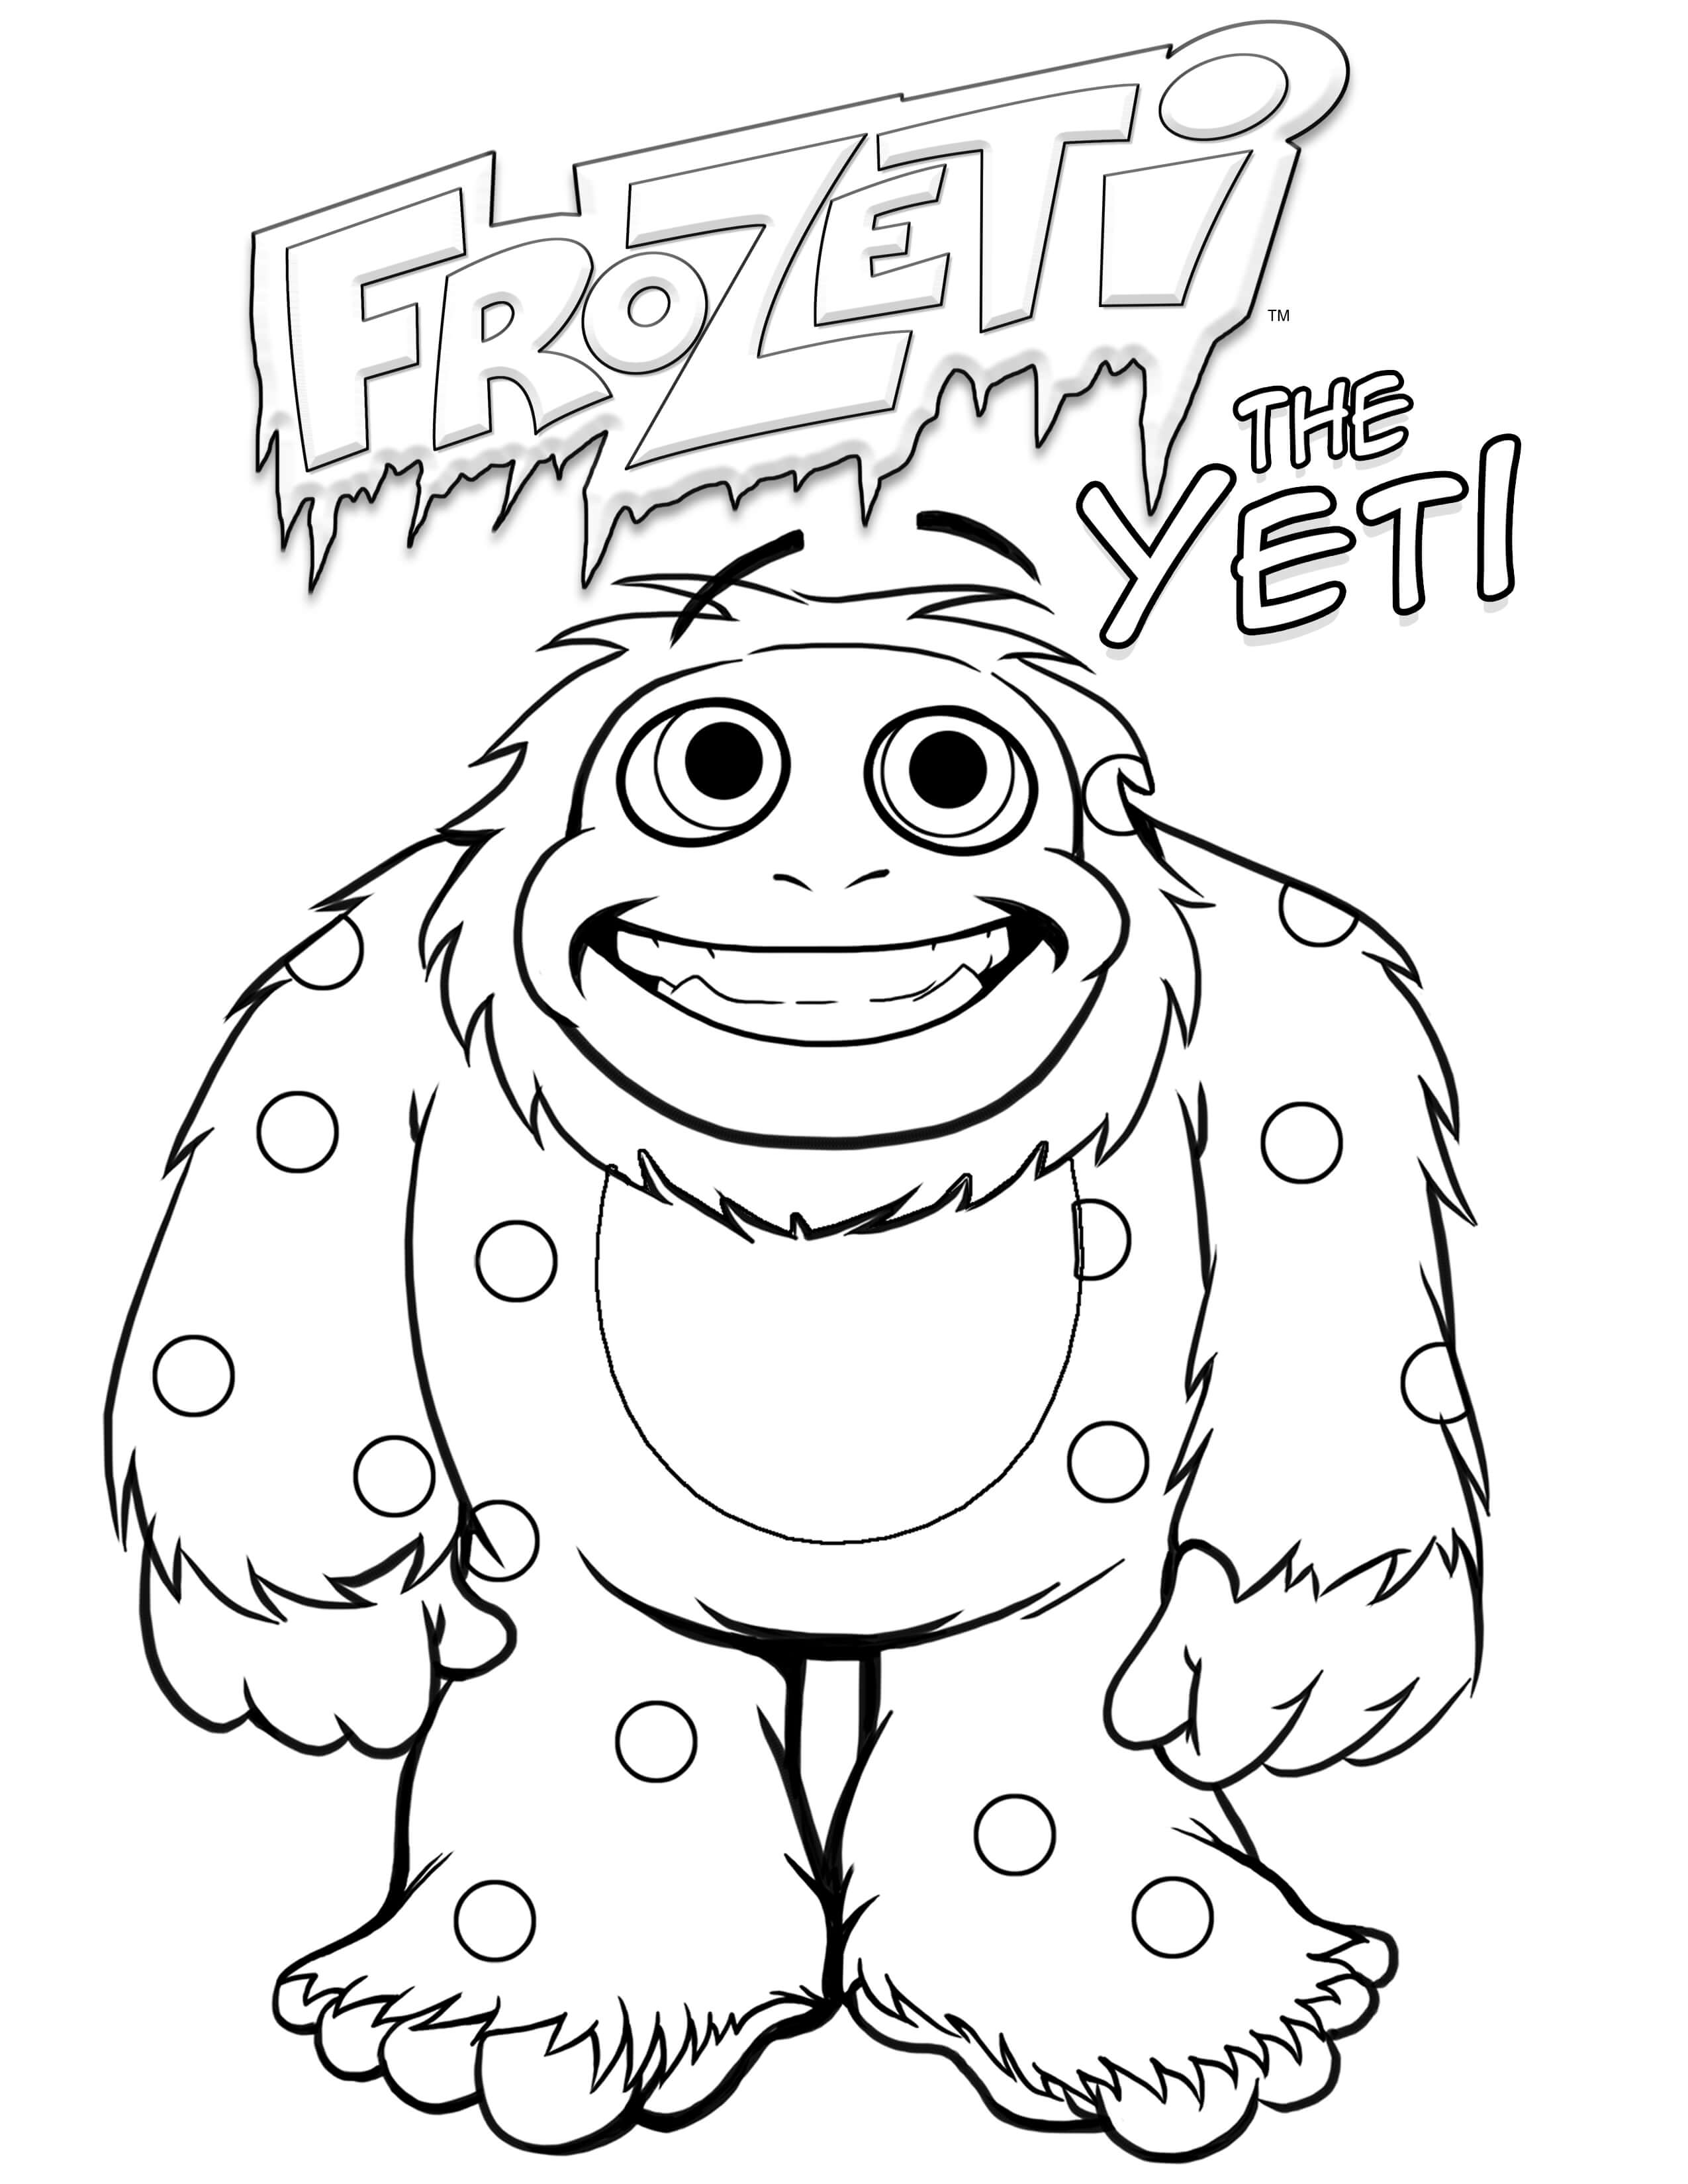 everest-is-a-yeti-coloring-page-printable